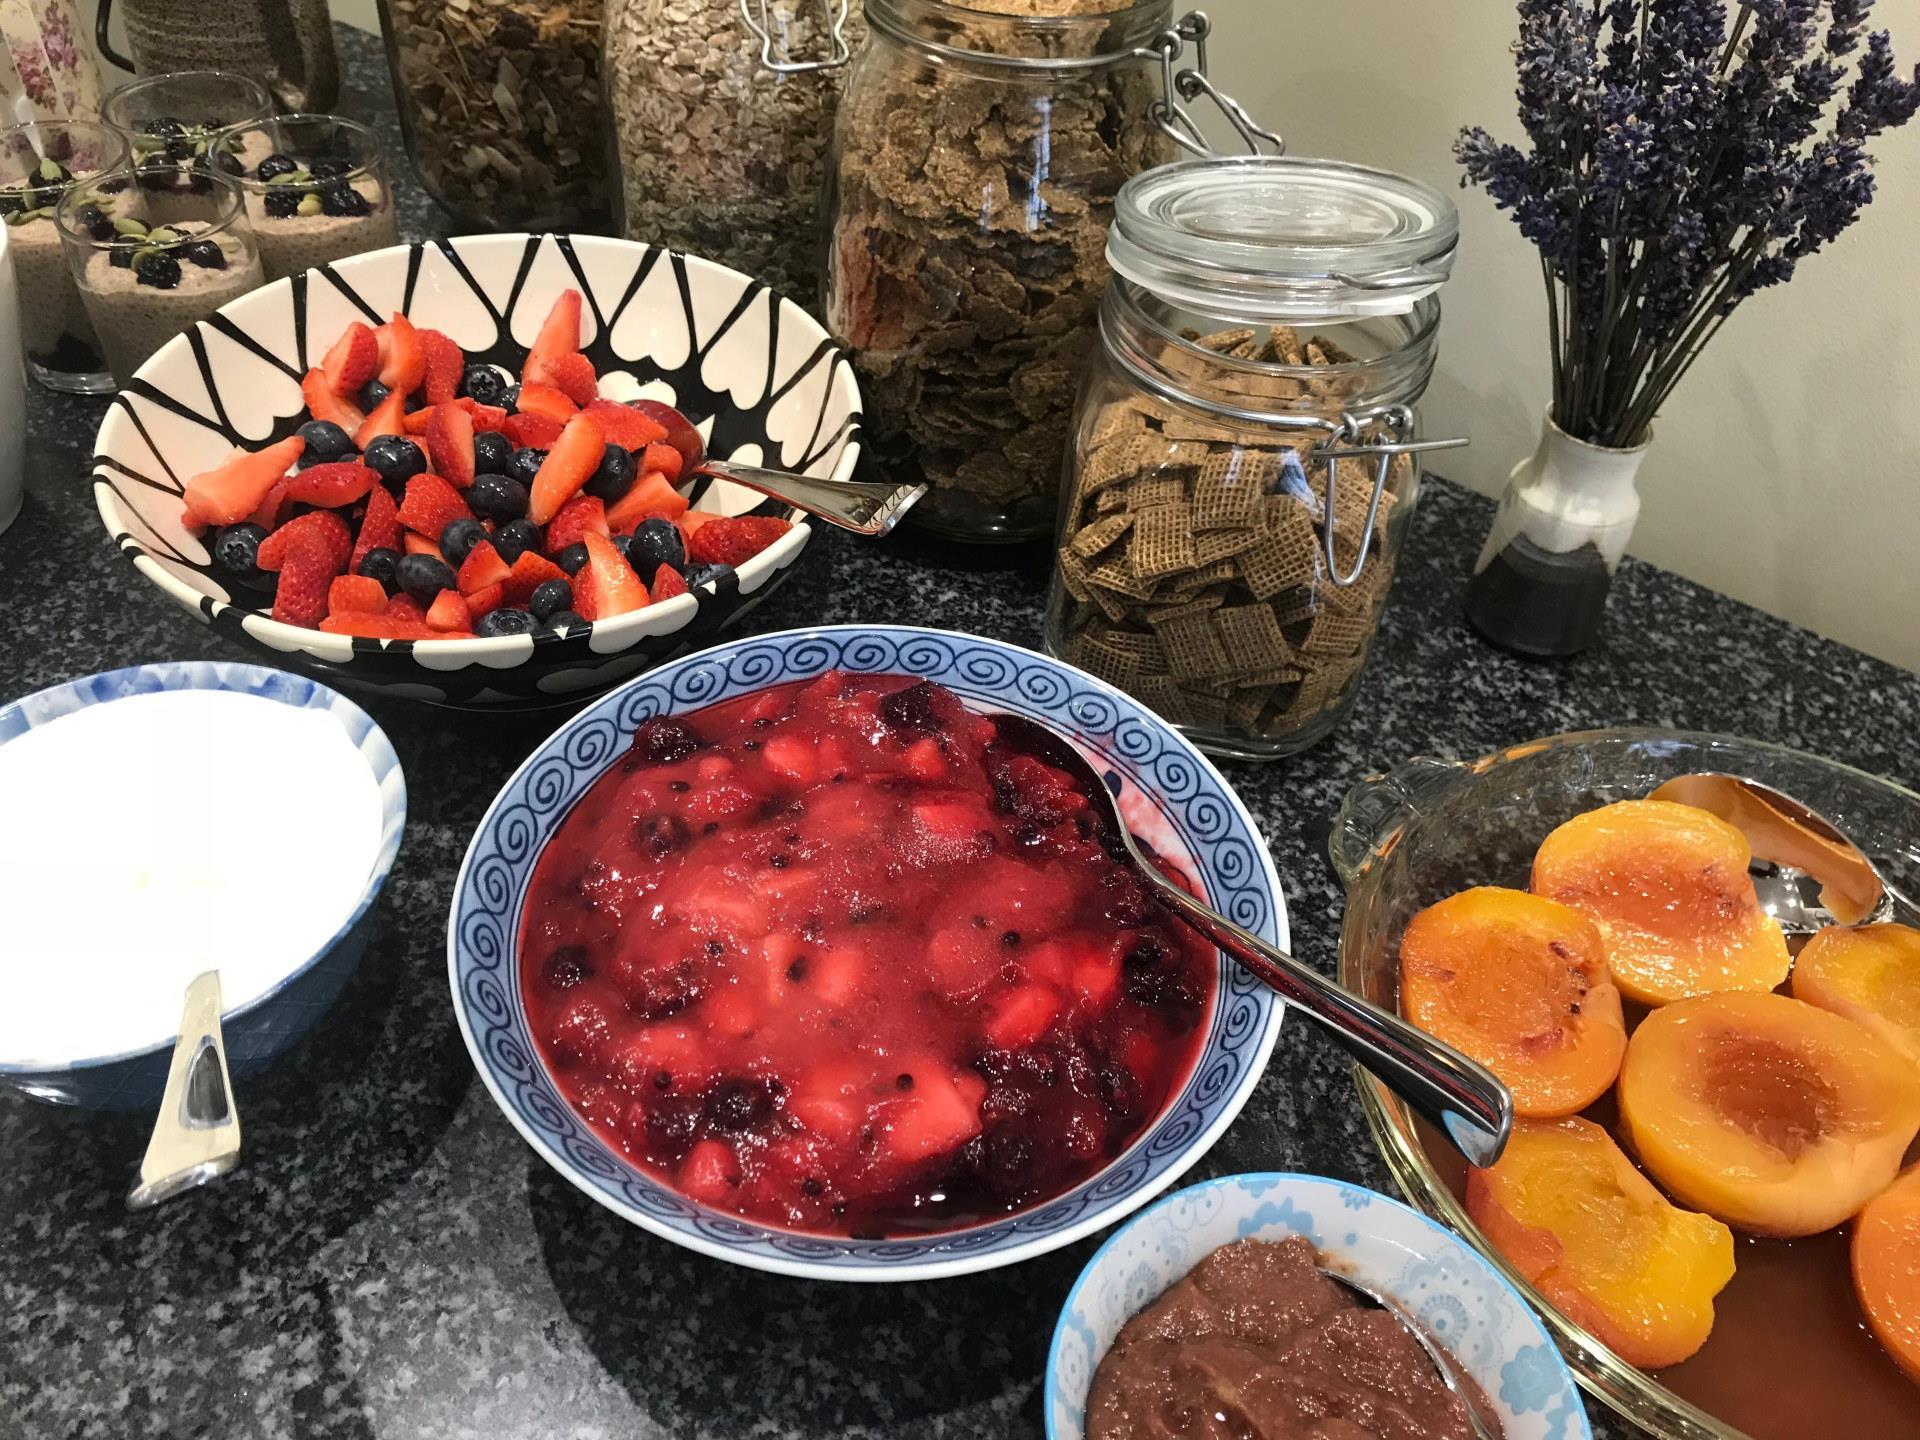 Fresh Fruit and cereals on the breakfast bar